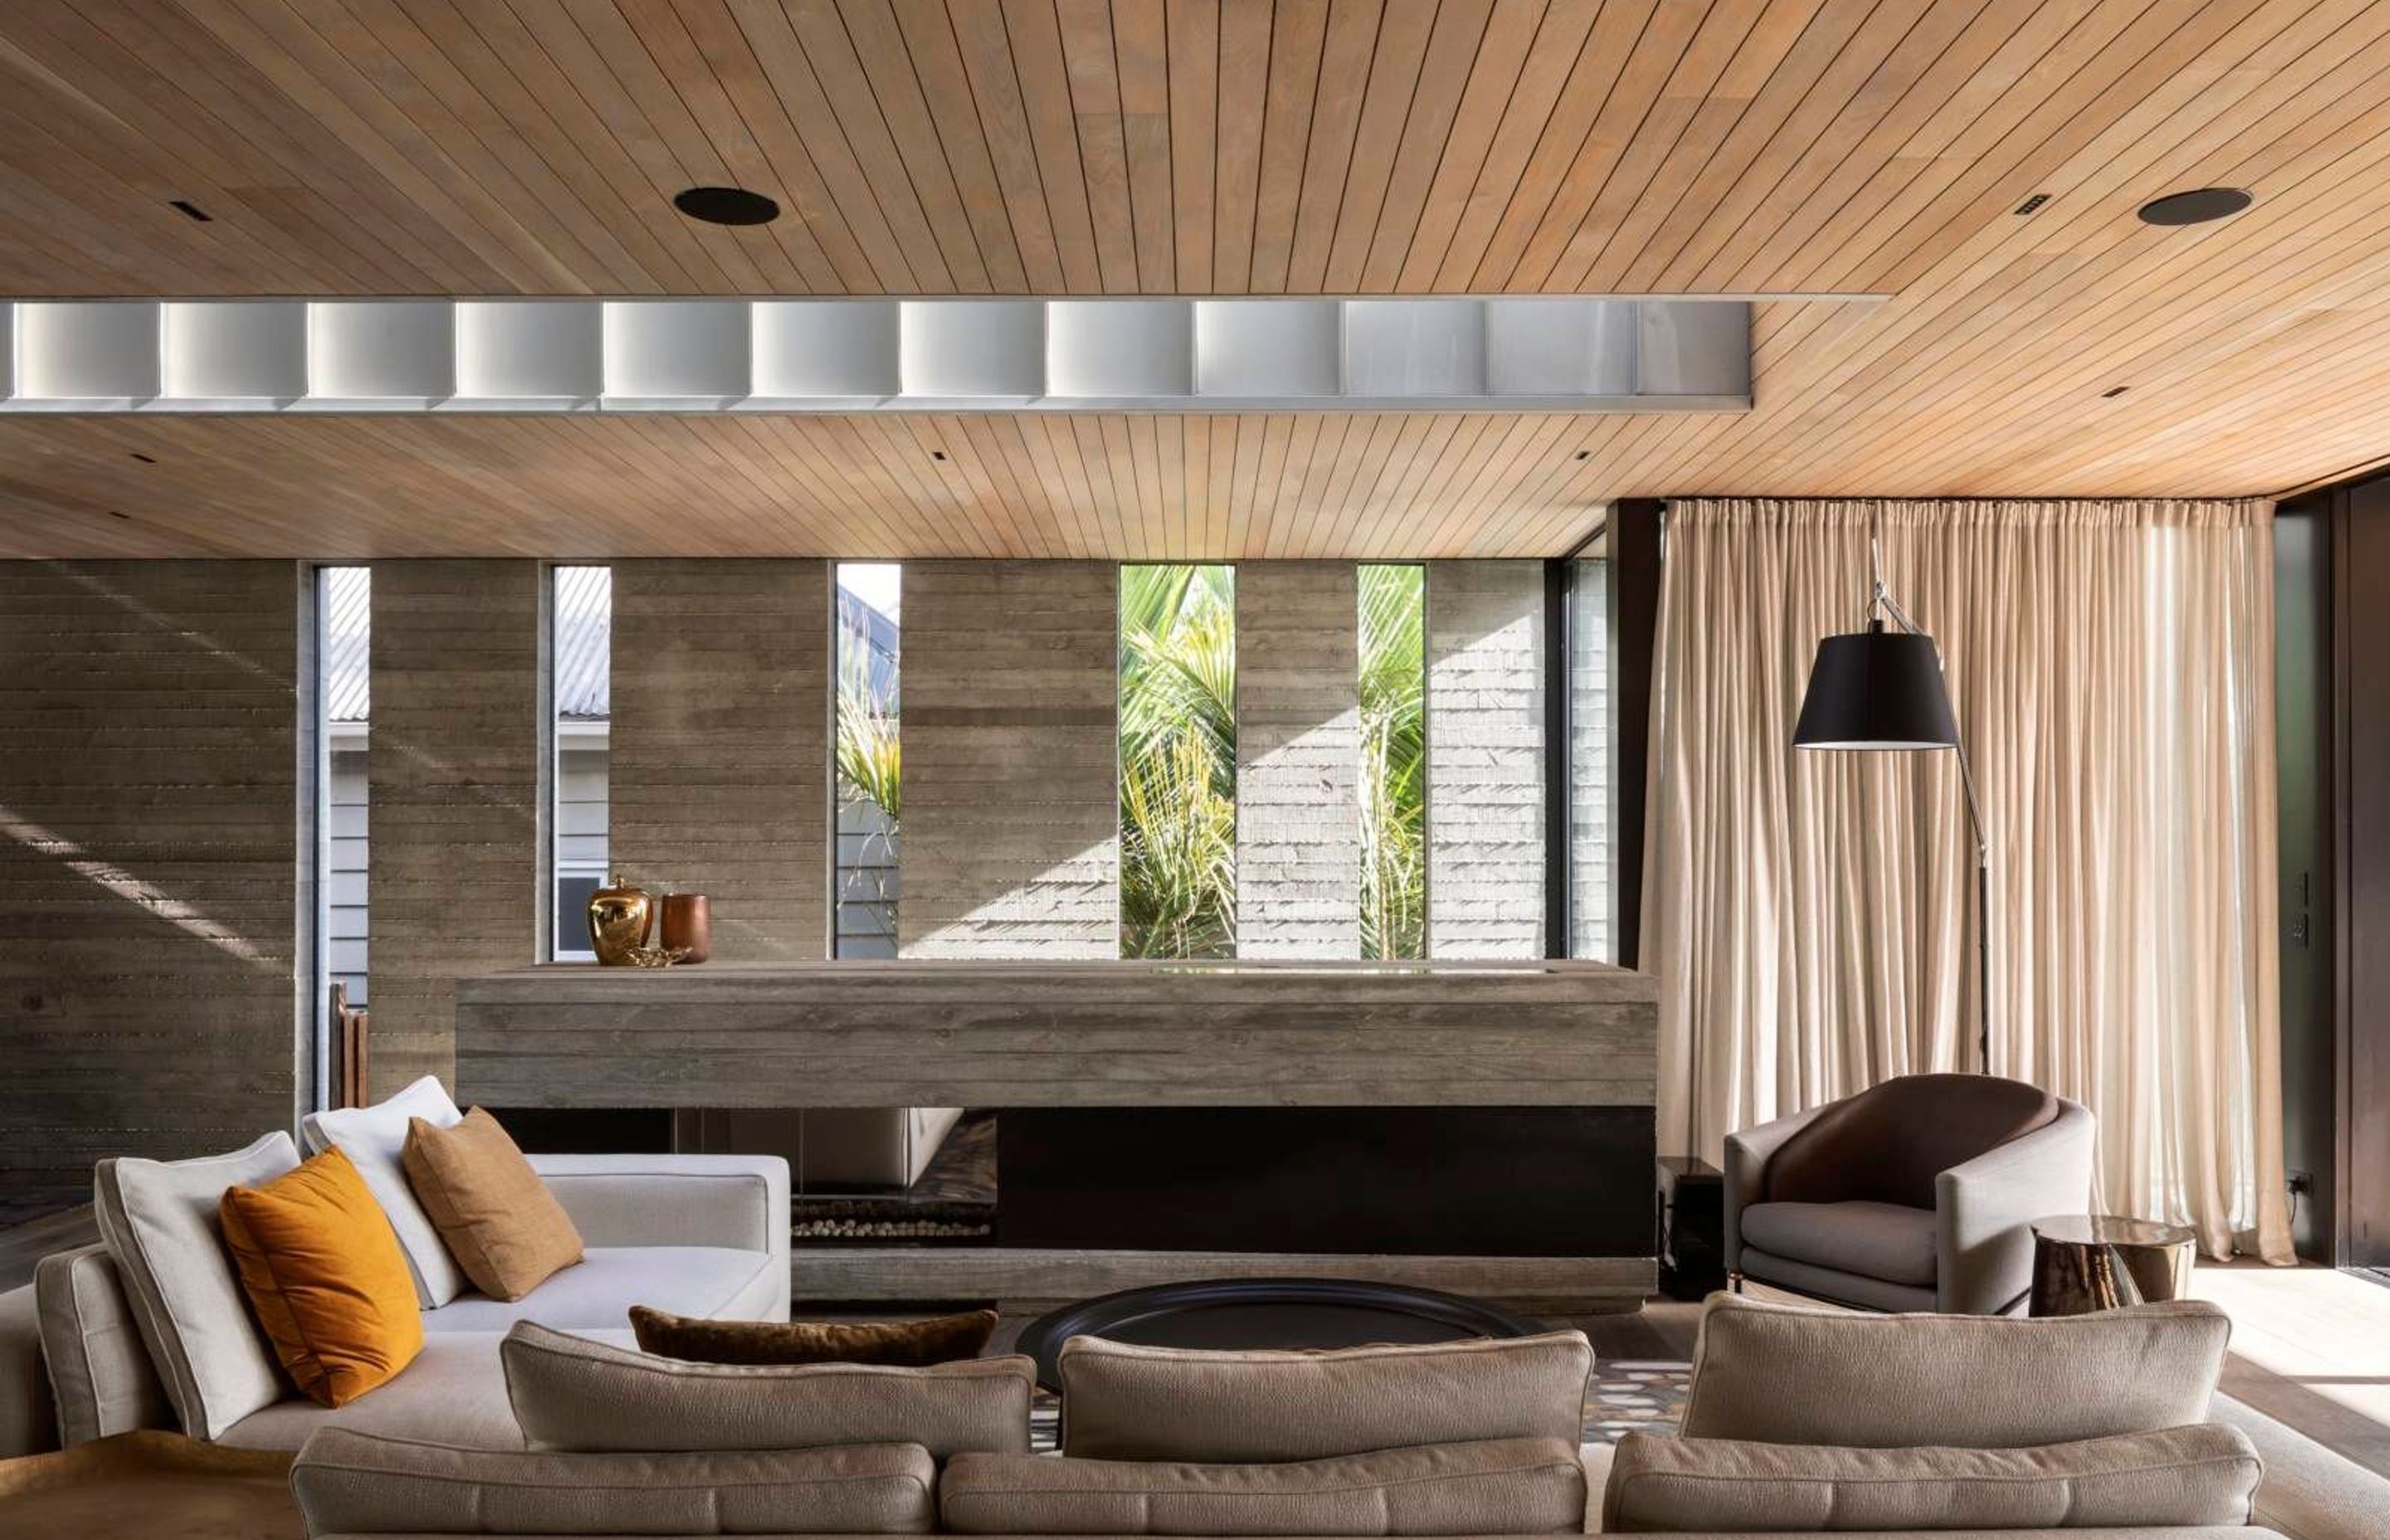 The living area perfectly displays the interplay between strong horizontal and vertical lines.